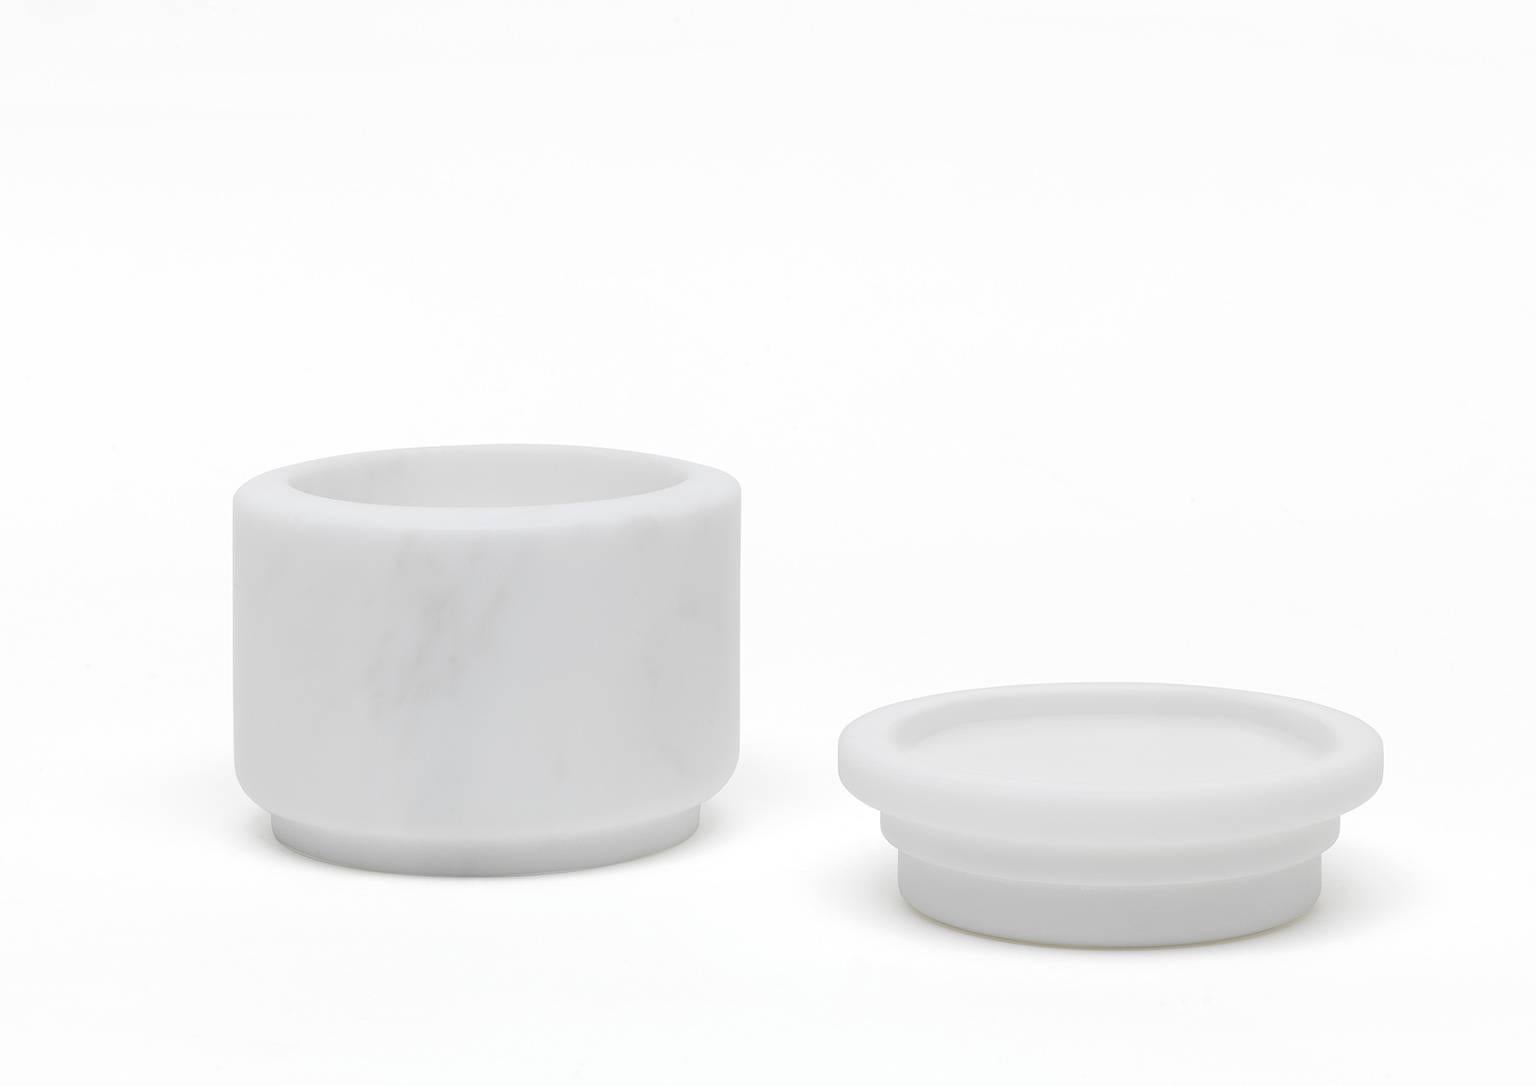 Pyxis pot / jar / container for multiple uses.
Size: 12.6 x 11 cm, smooth finishing. Commercial name: Pyxis S, Pyxis Collection by the Spanish Designer Ivan Colominas. Available also in Black Marquinia and different sizes. Made in Italy, hand